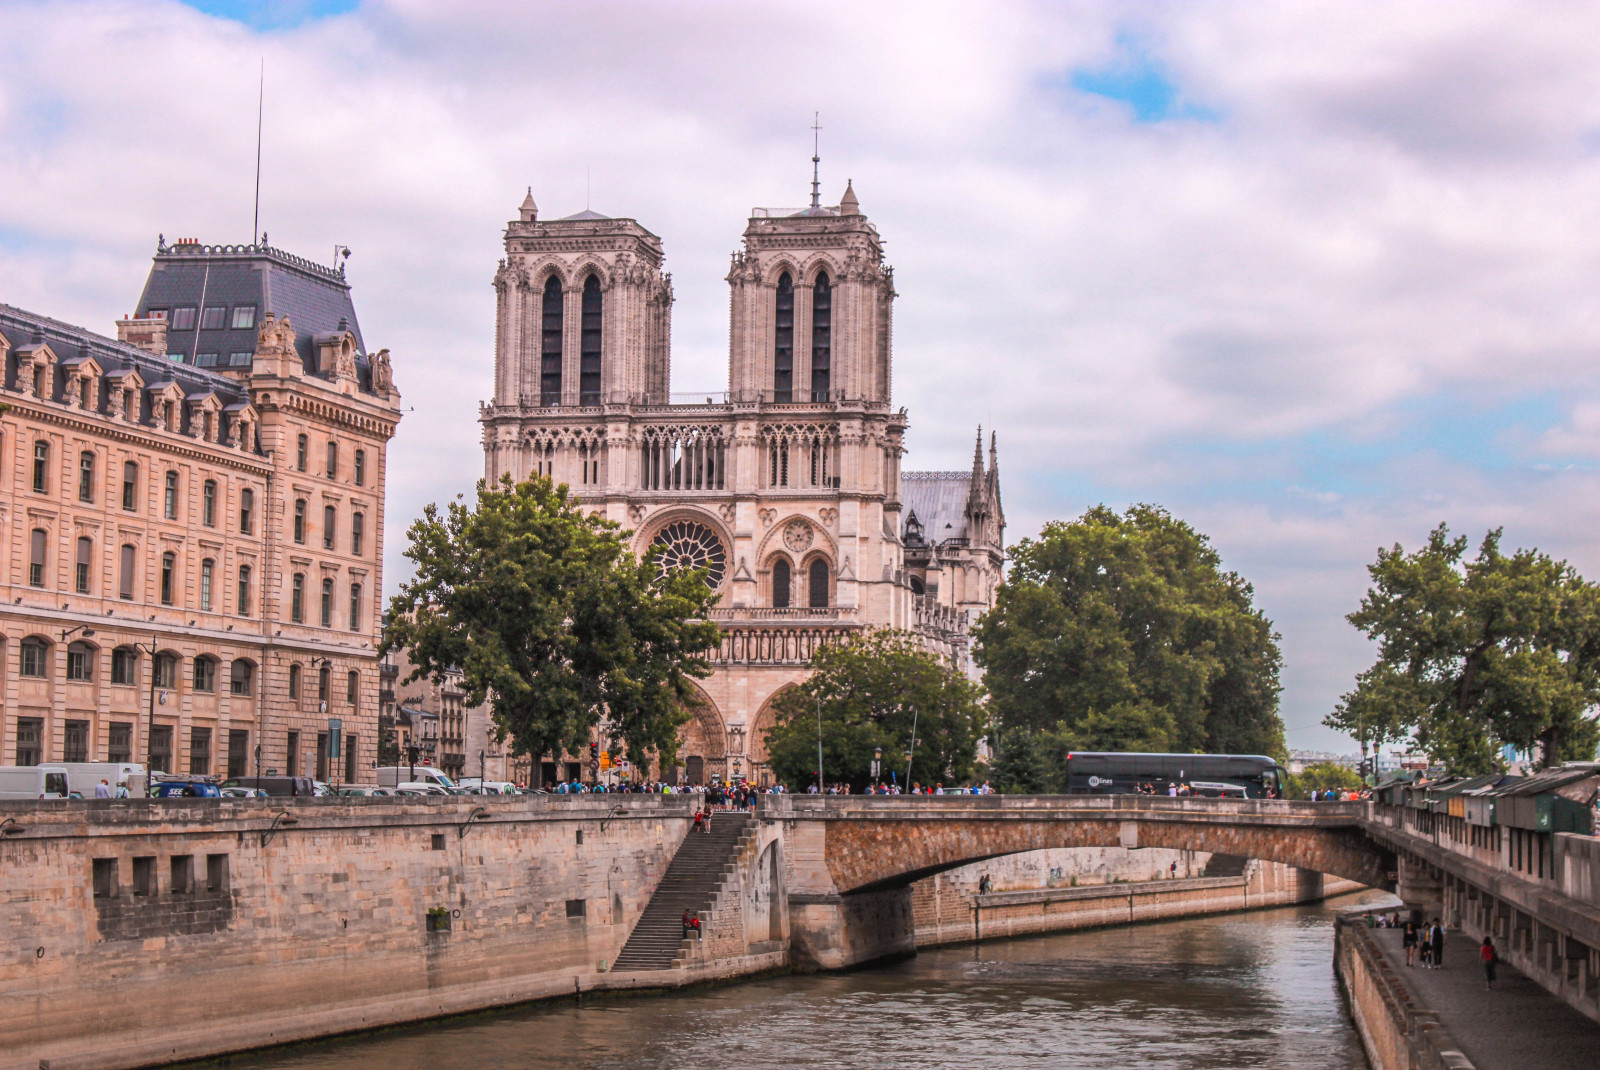 A large tan church - the Notre Dame in Paris - with stained glass windows two pillars and a bridge over a river with green trees